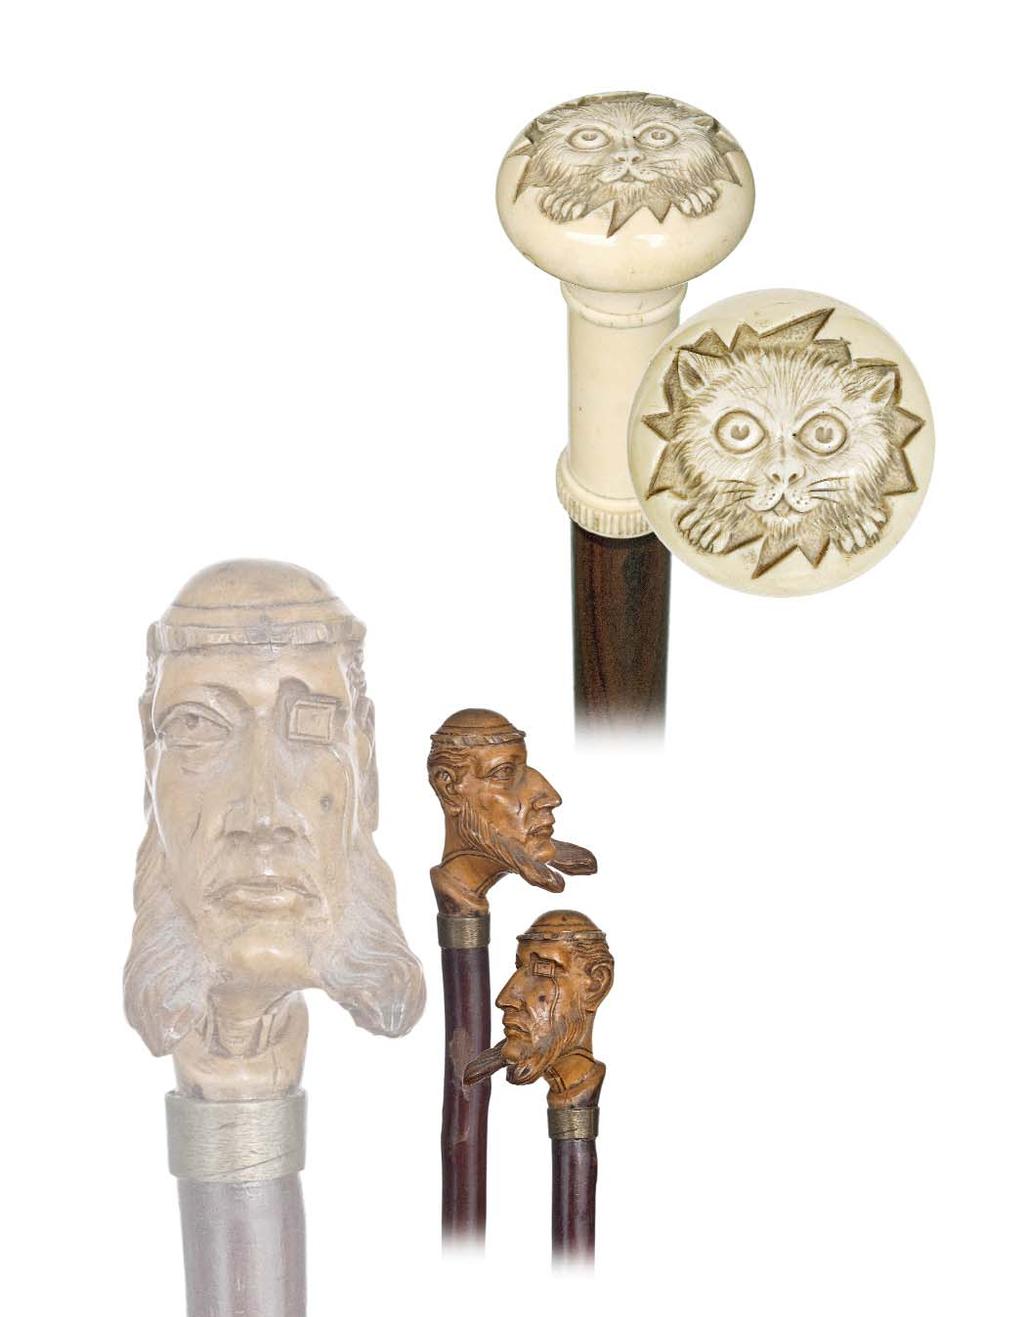 75. Ivory Cat Cane Late 19th Century and most likely English-Substantial ivory handle carved with a charming cat portrait inspired by the drawings of Louis Wain, rosewood shaft and a horn ferrule.